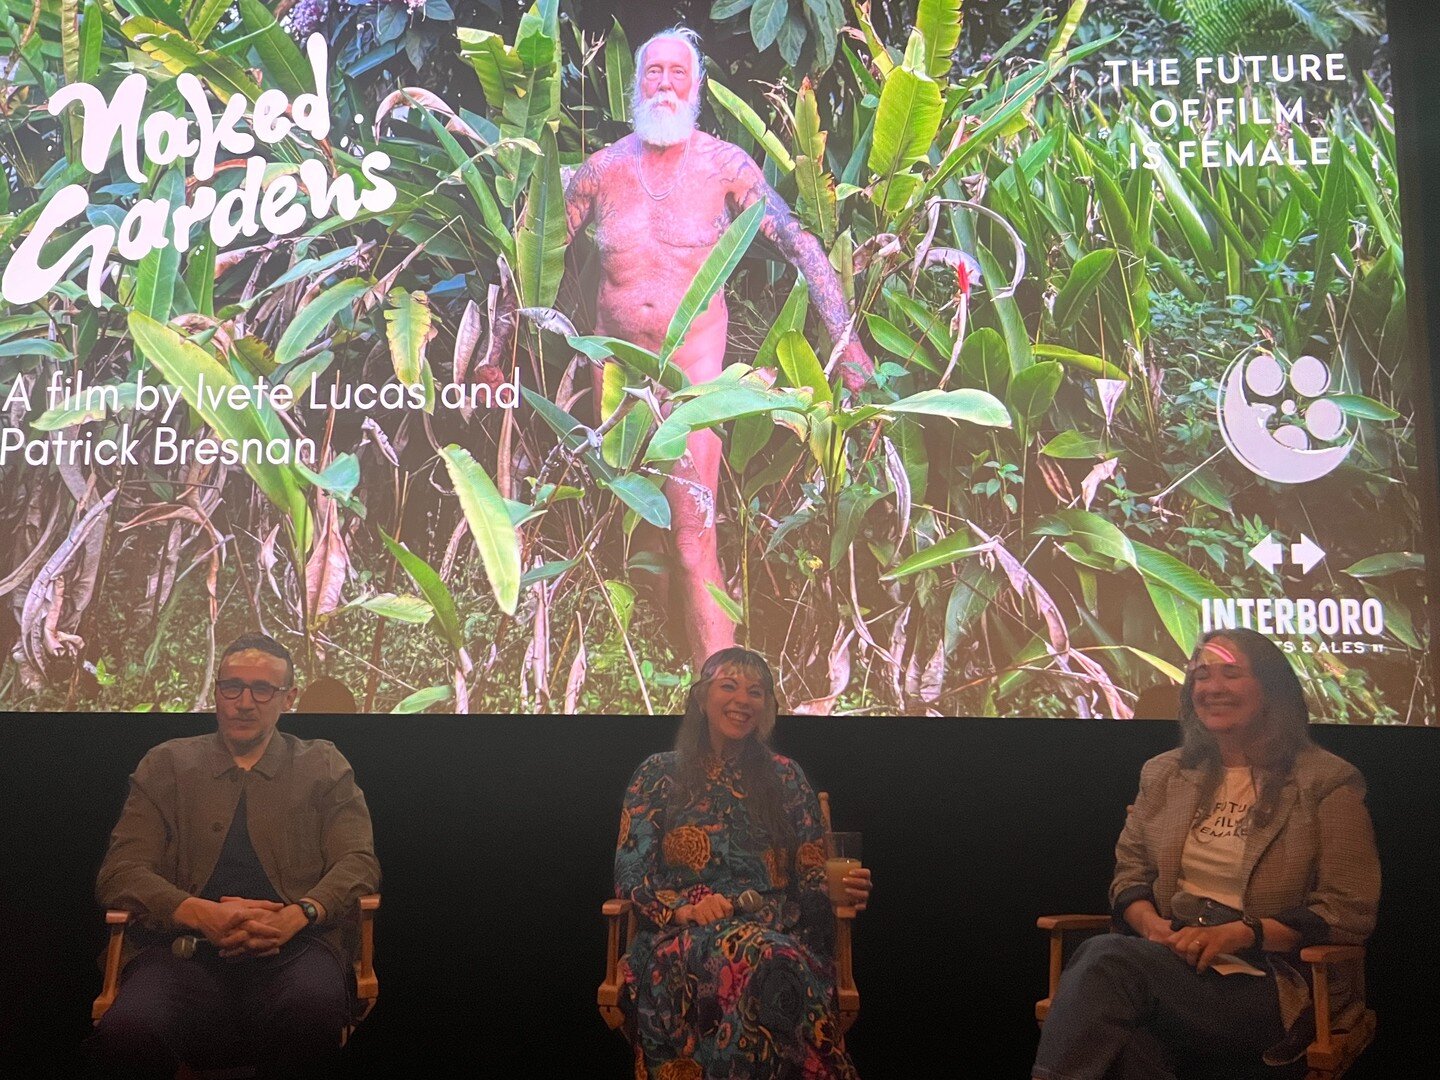 To say our screening of Naked Gardens at @nitehawkcinema was a blast is an understatement. It was a lovely audience and a super fun Q&amp;A with director Ivete Lucas and producer Roberto Minervini. Thank you @caryncoleman for bringing a real Floridia